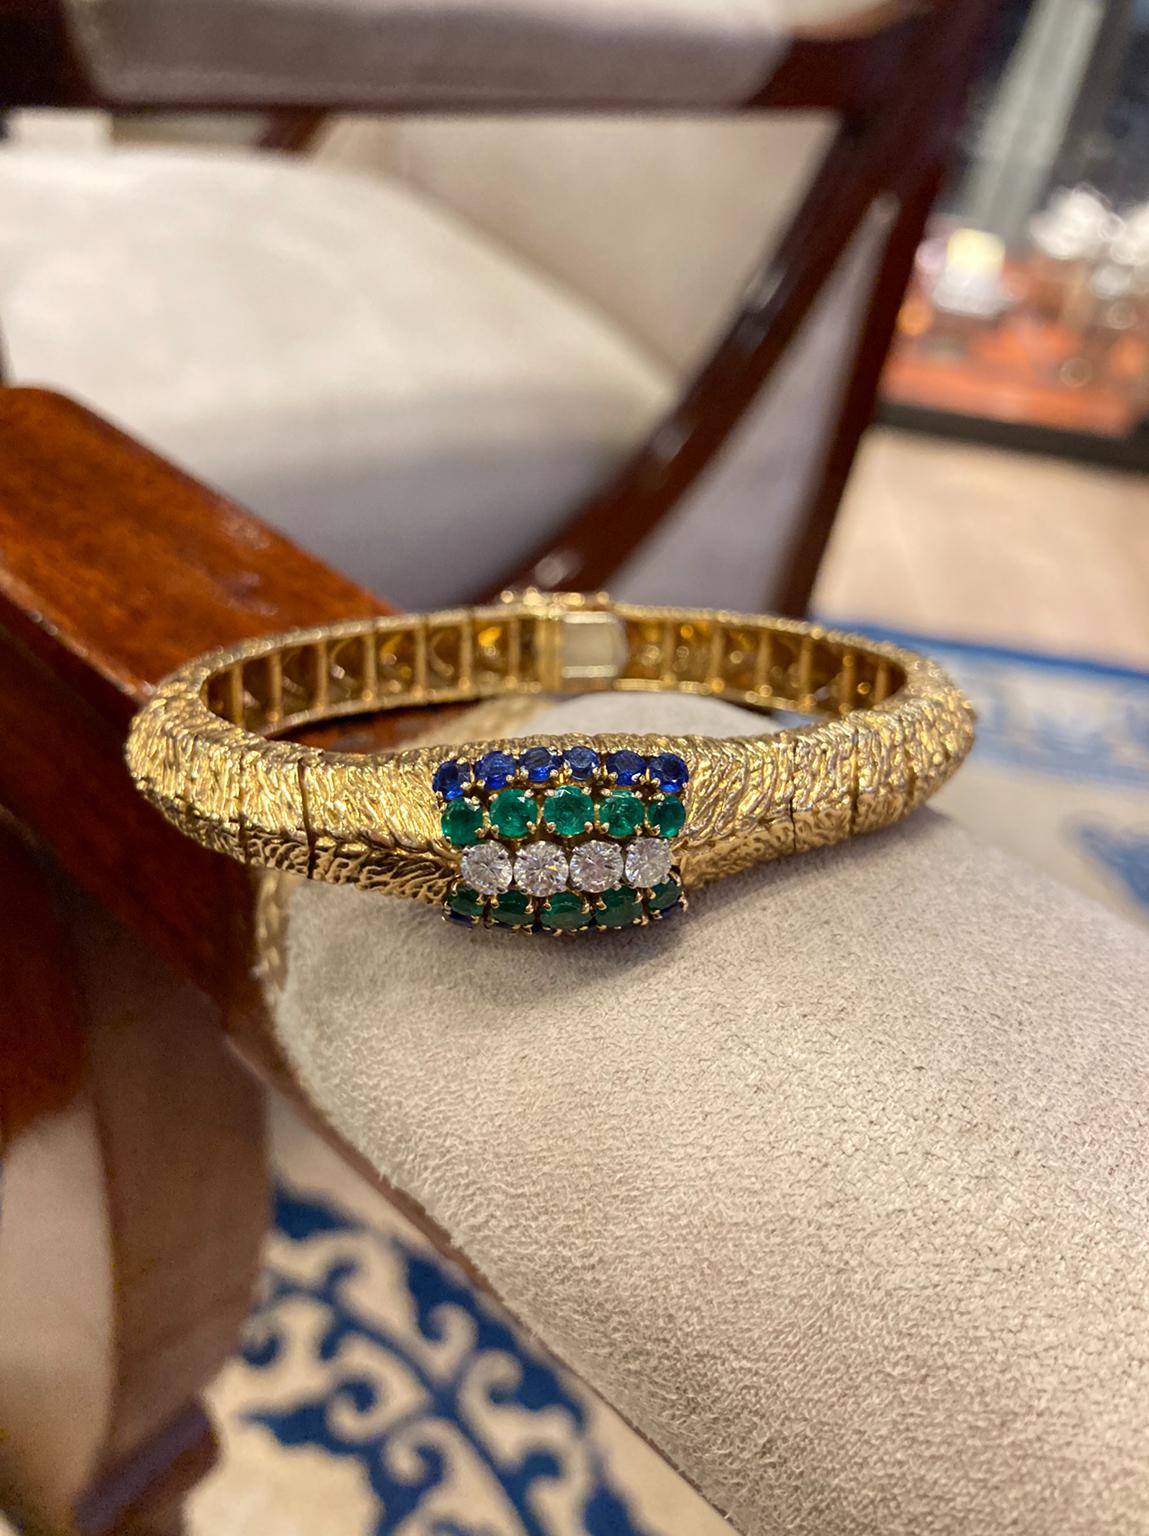 A retro Boucheron Paris 18 karat yellow gold mystery watch-bracelet with brilliant cut sapphires, emeralds, and 0.70 carats of diamonds. Weighs 54.6 grams. Made in France, circa 1940.